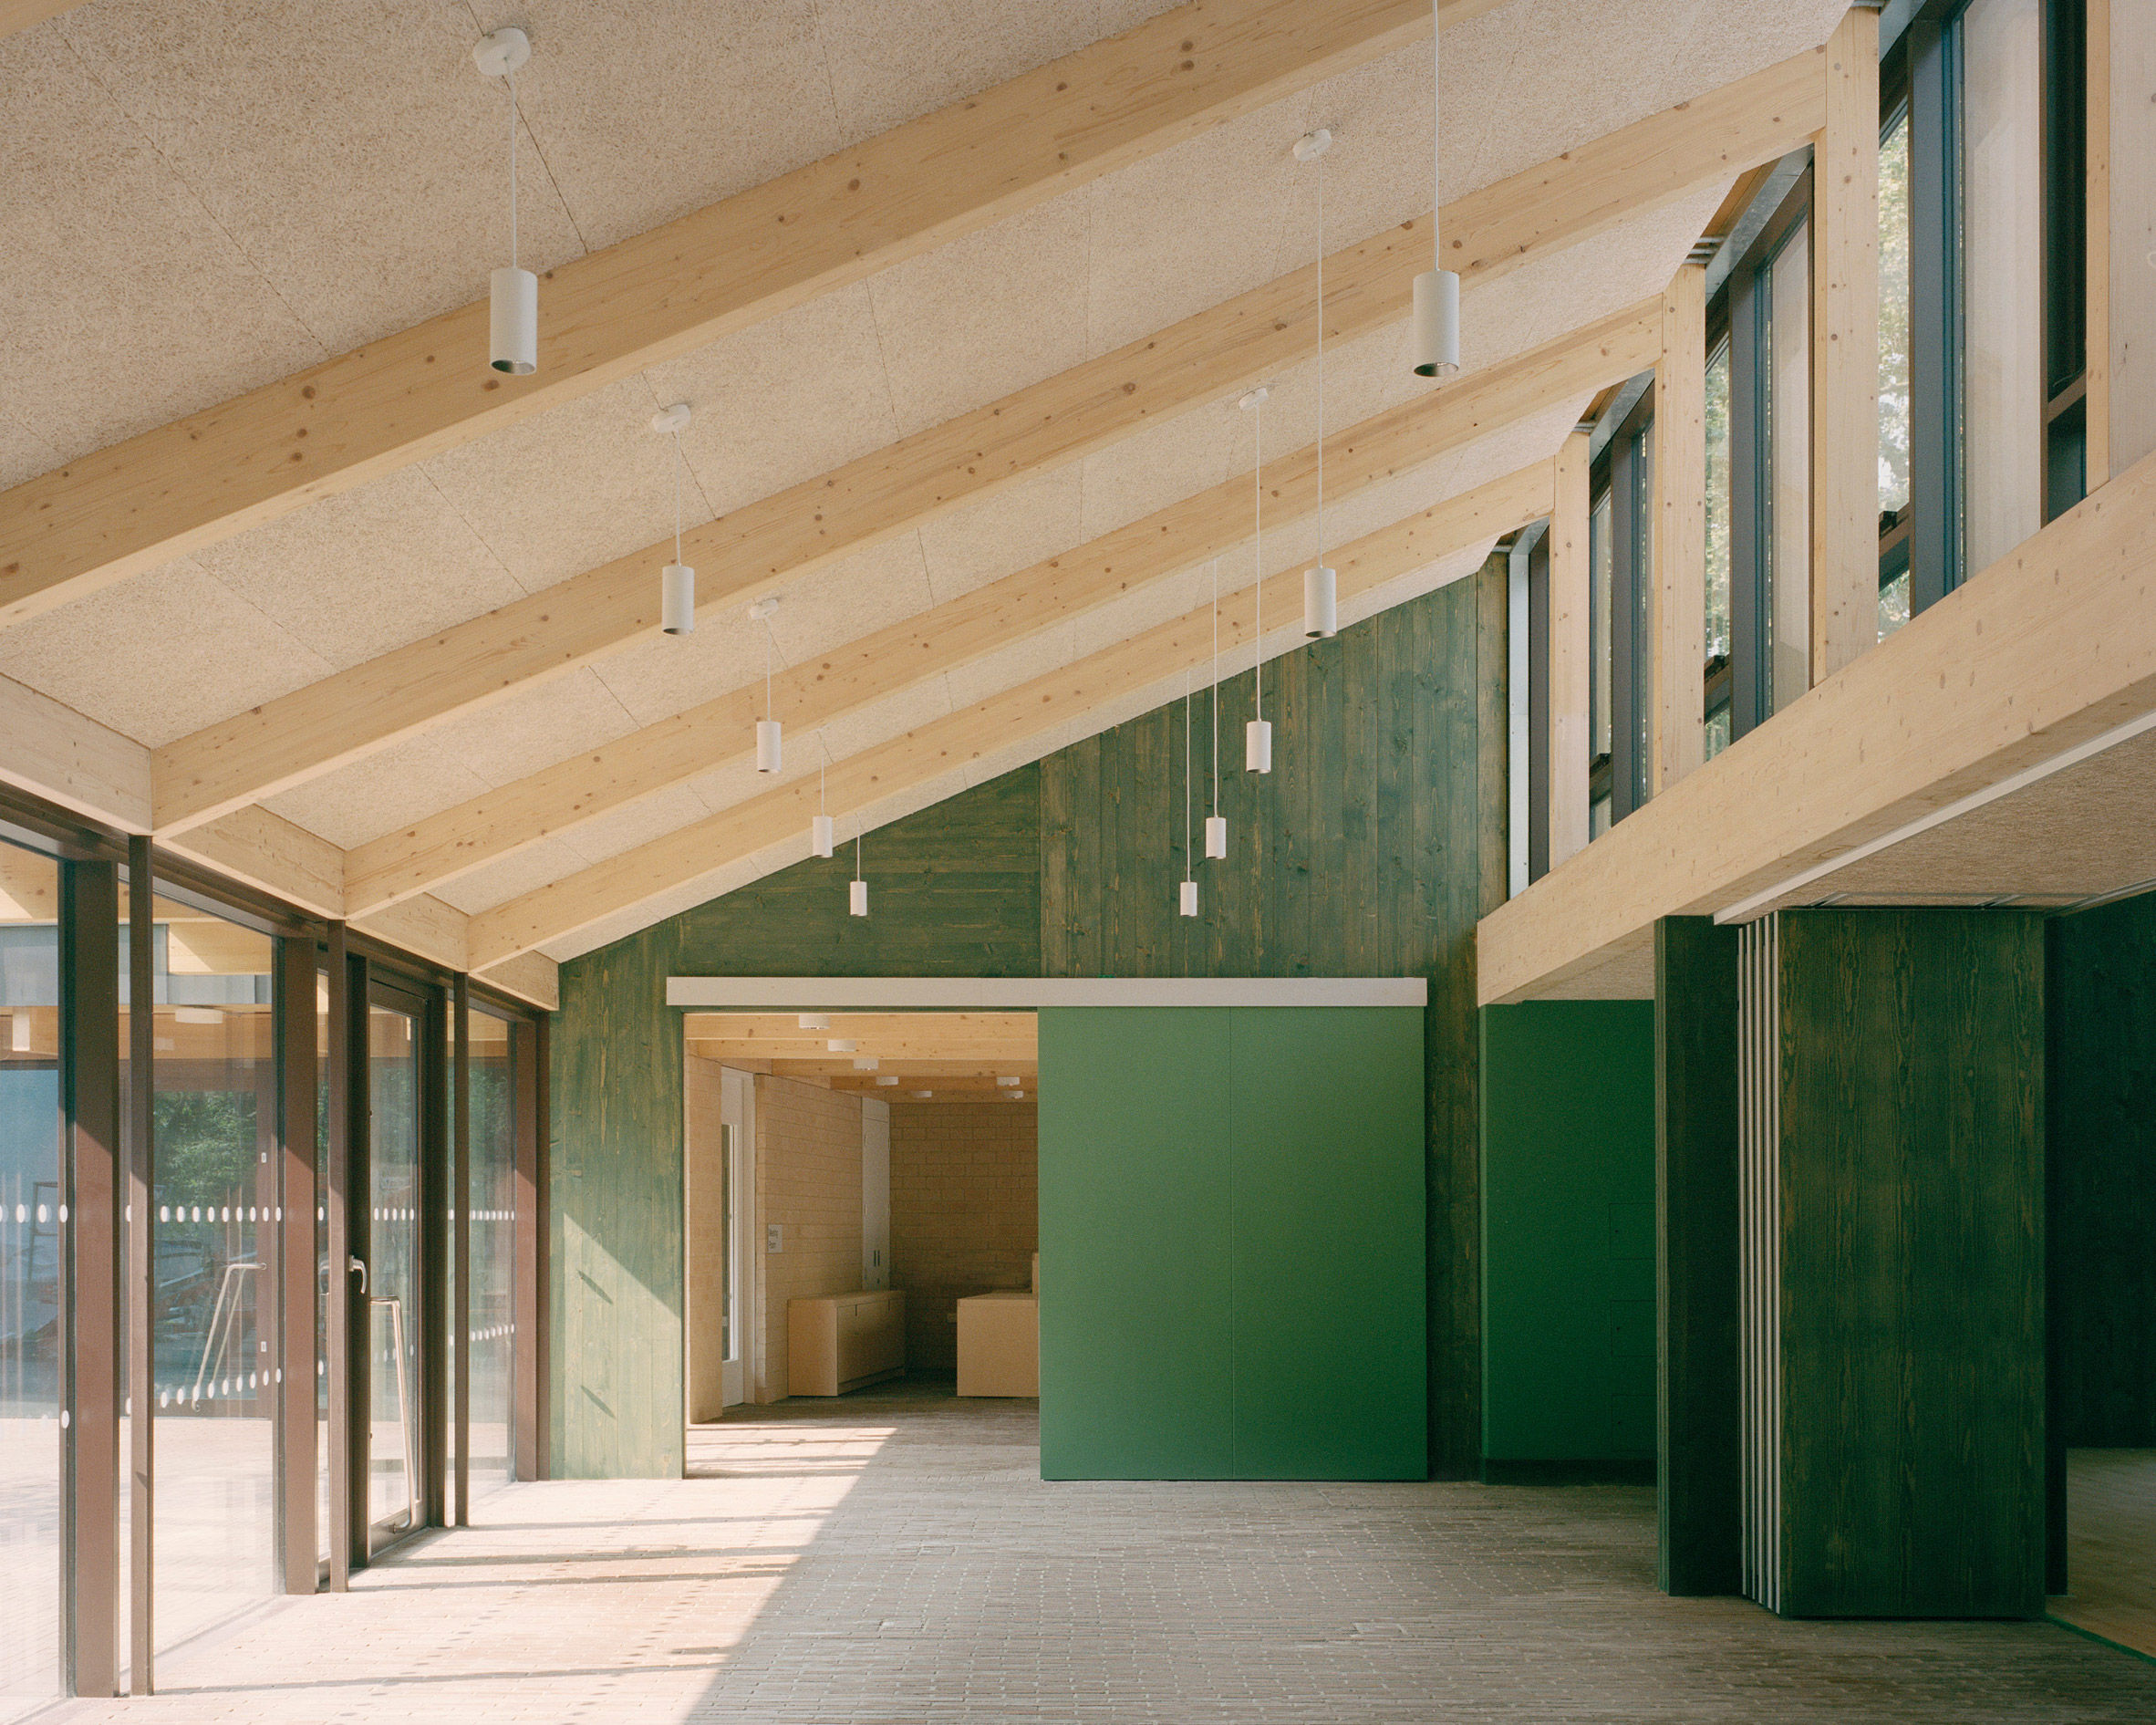 Interior of Sands End Arts and Community Centre by Mæ Architects